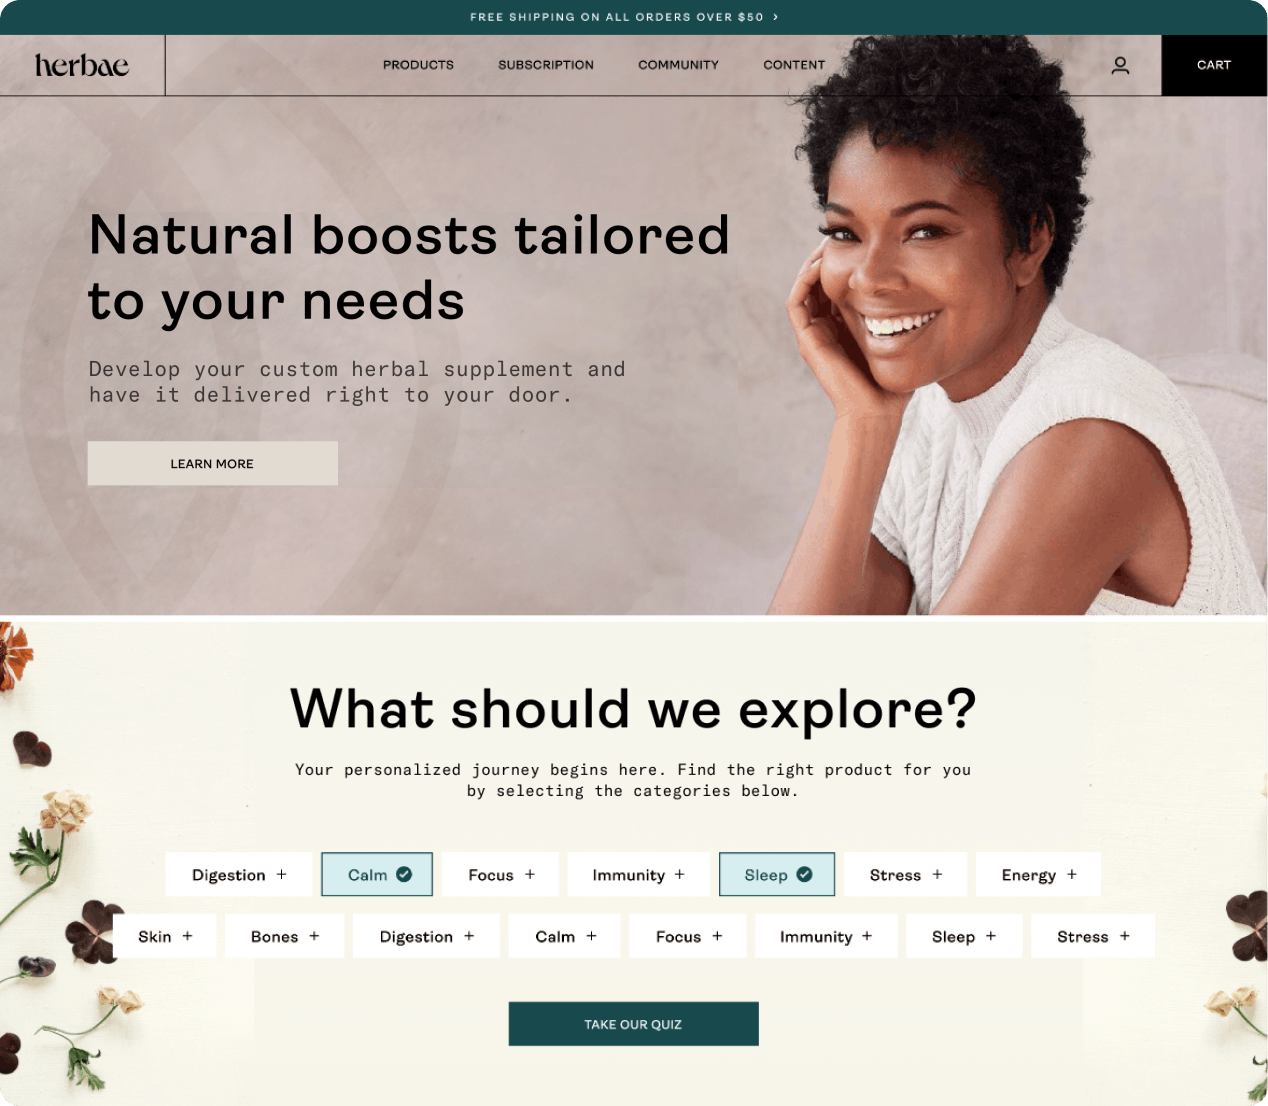 Screenshot of a conceptual homepage of the new Herbae brand featuring Gabrielle Union